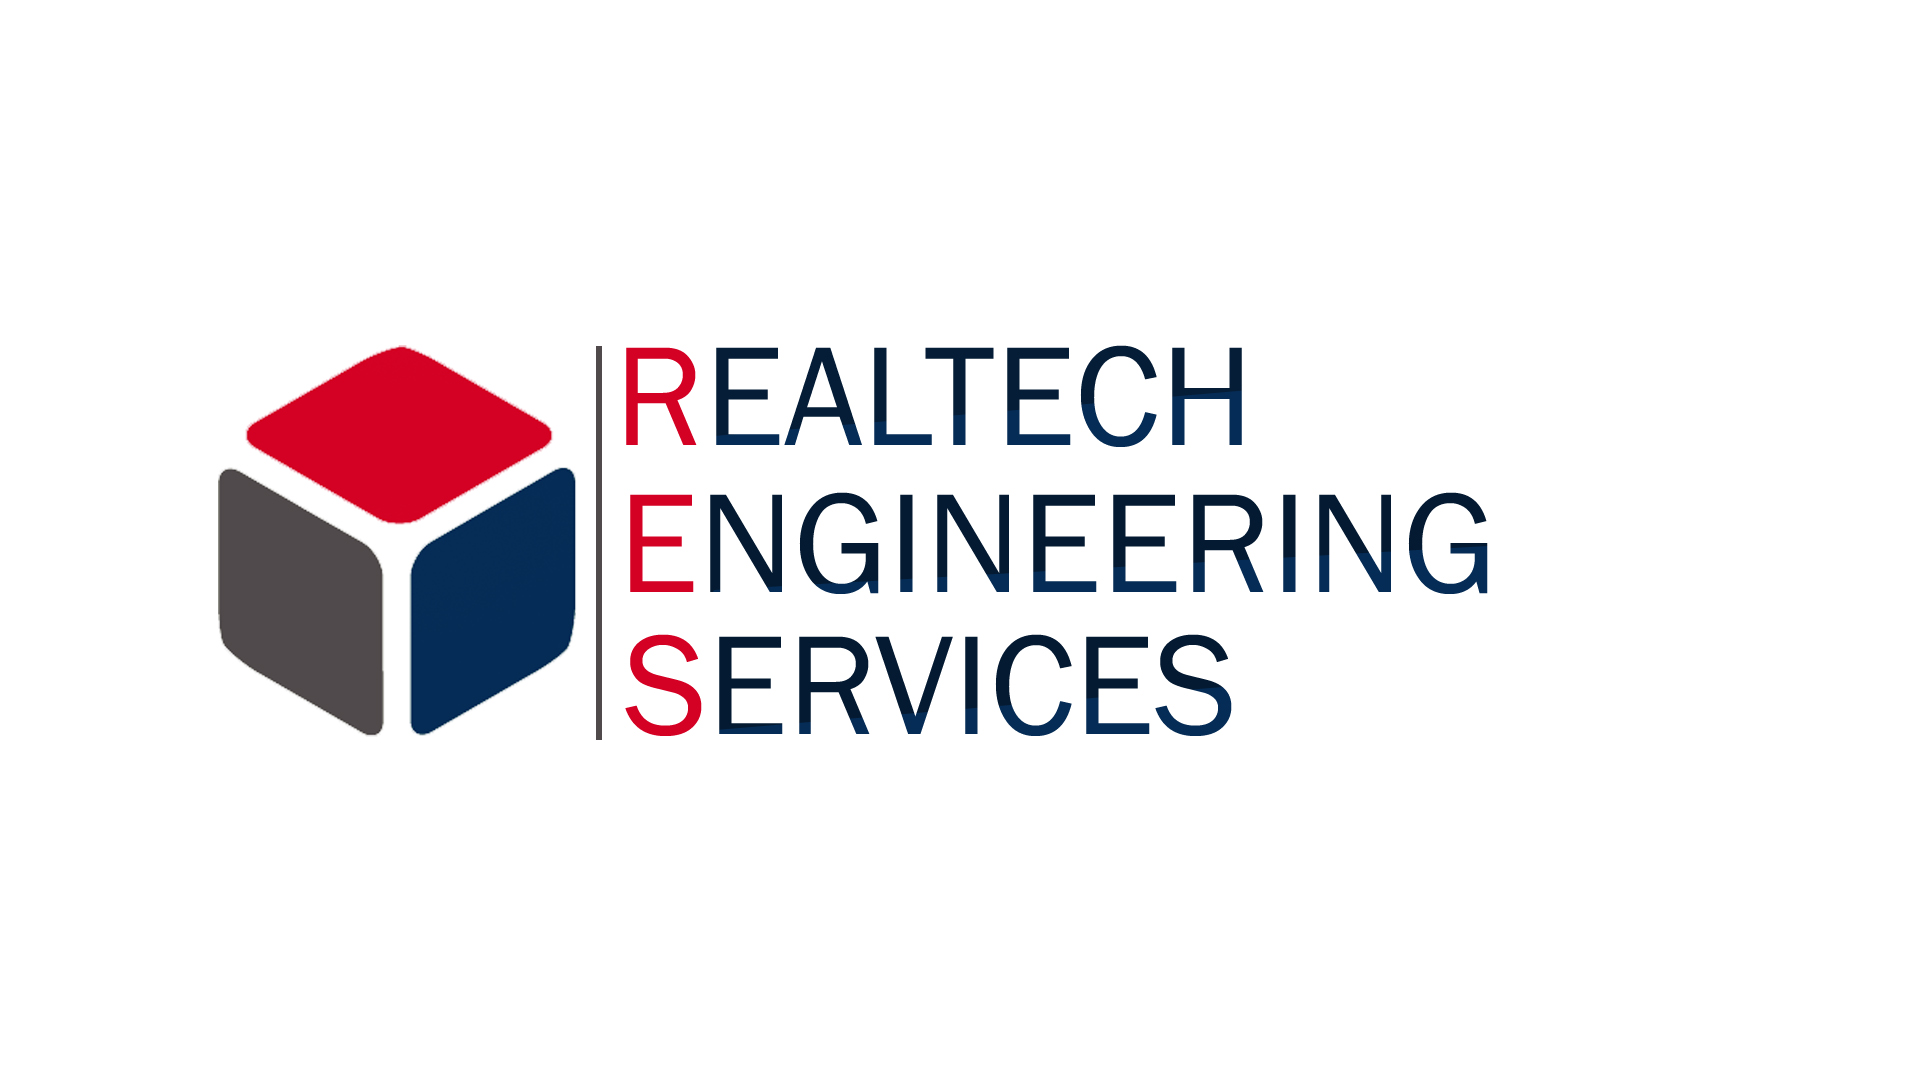 Realtech Engineering Services